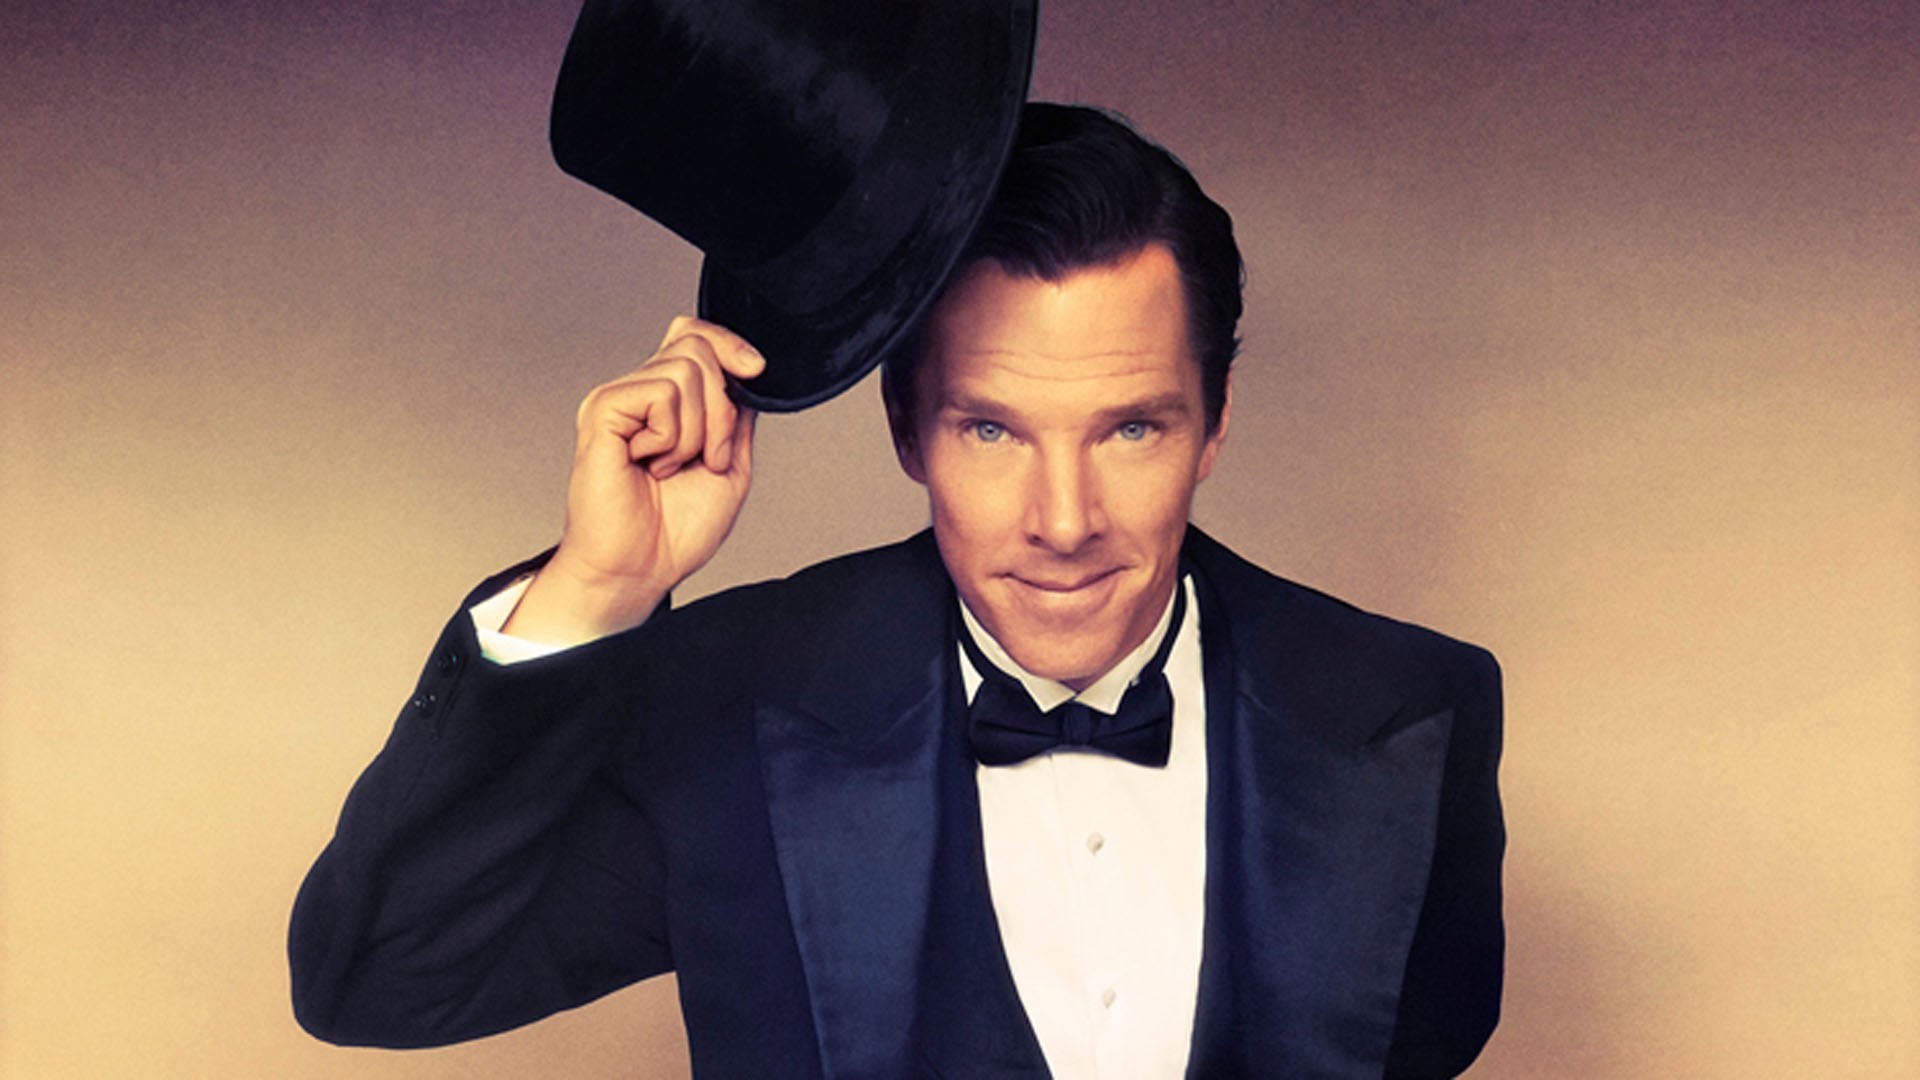 1920x1080 wallpapers for background hd benedict cumberbatch